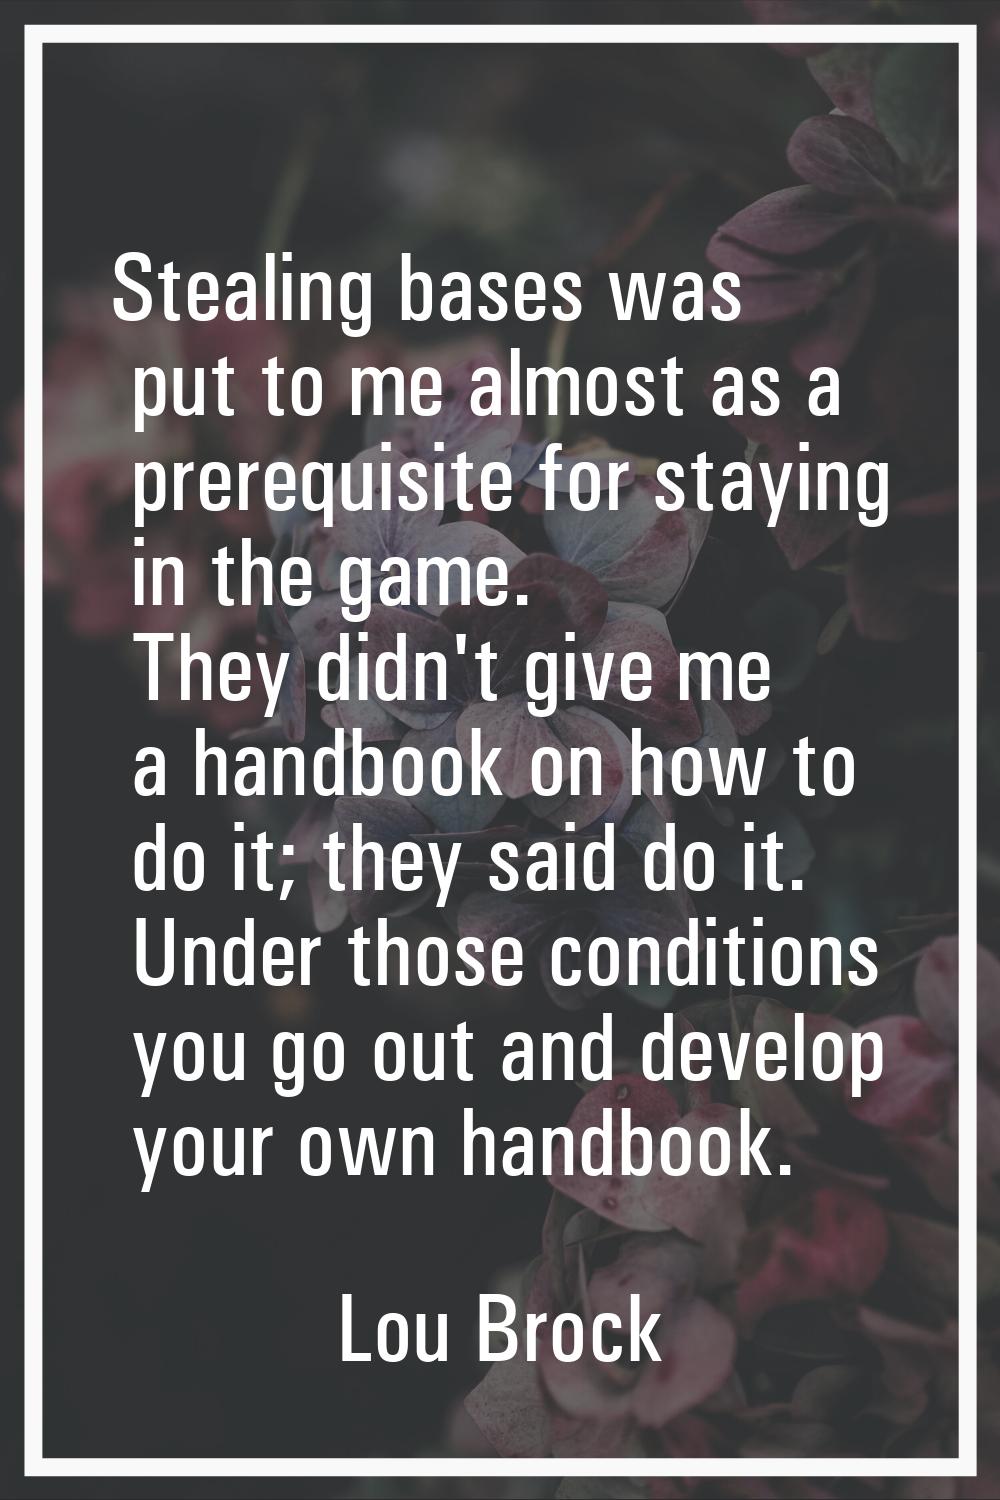 Stealing bases was put to me almost as a prerequisite for staying in the game. They didn't give me 